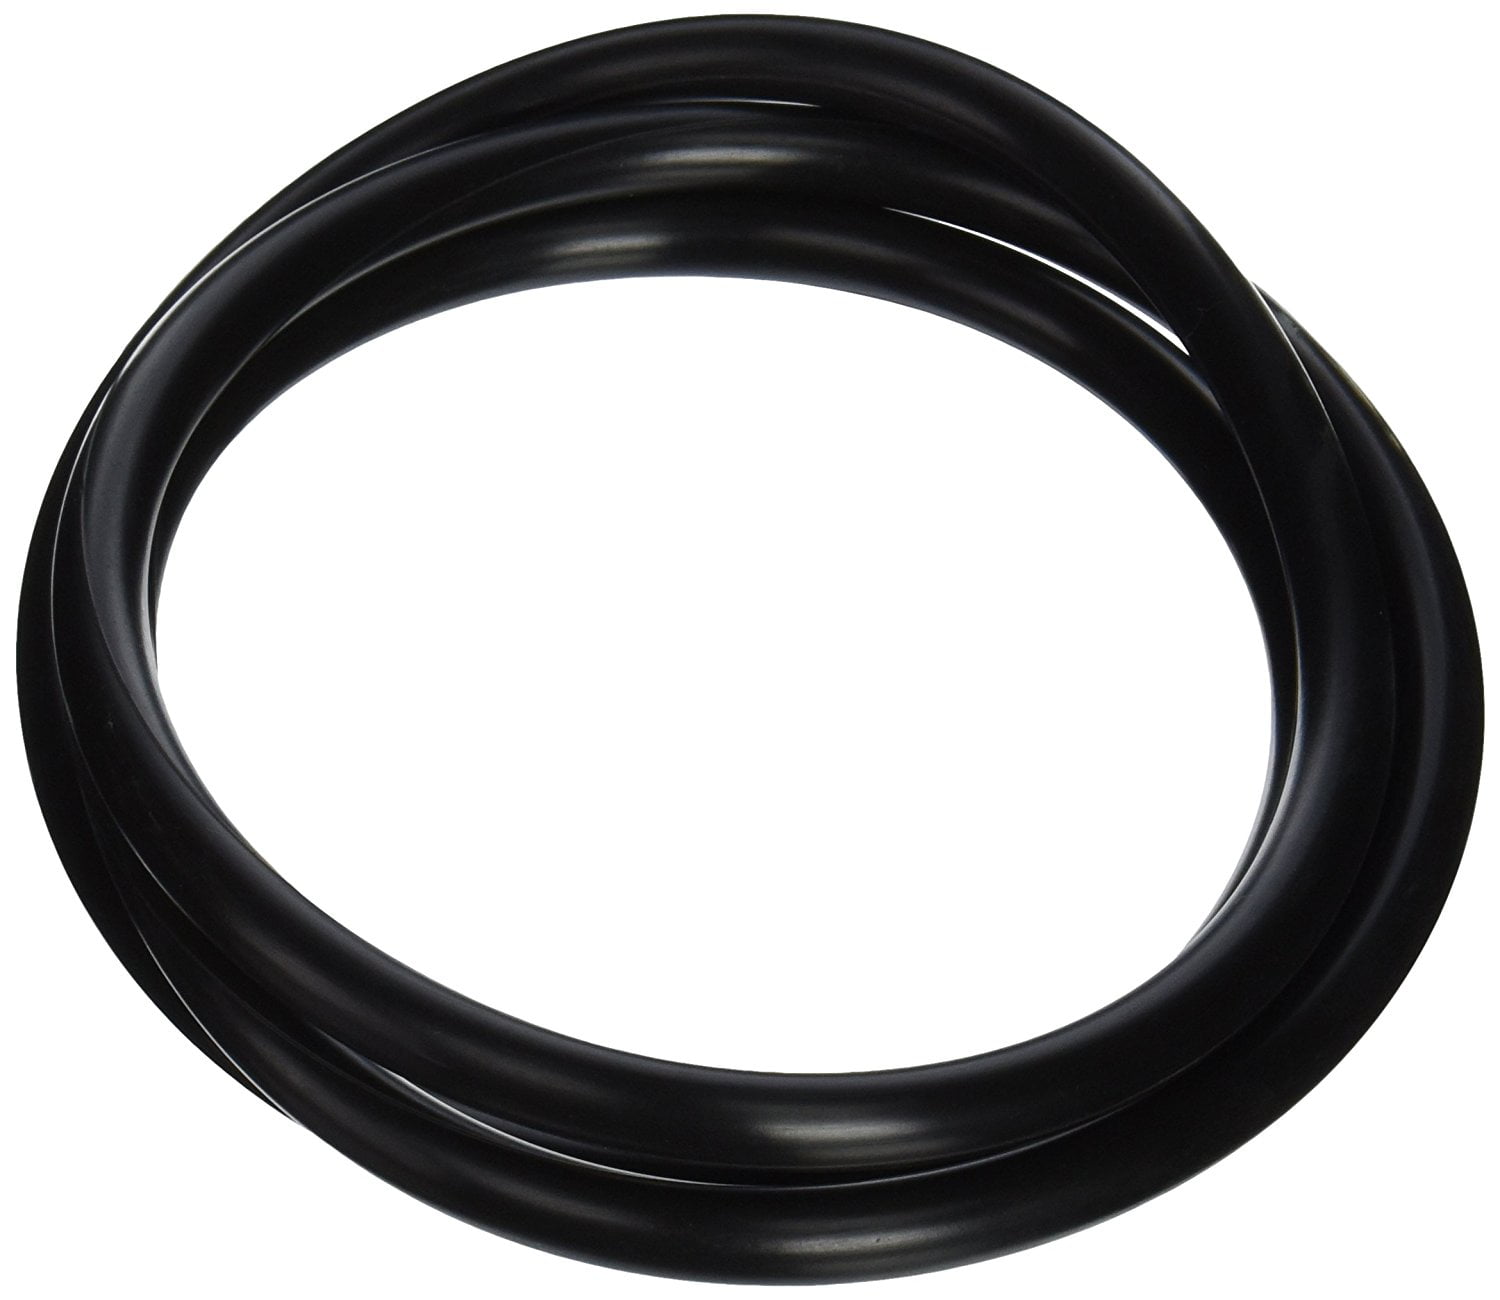 Pentair 072898 Replacement Clamp Ring Knob Style for Pools